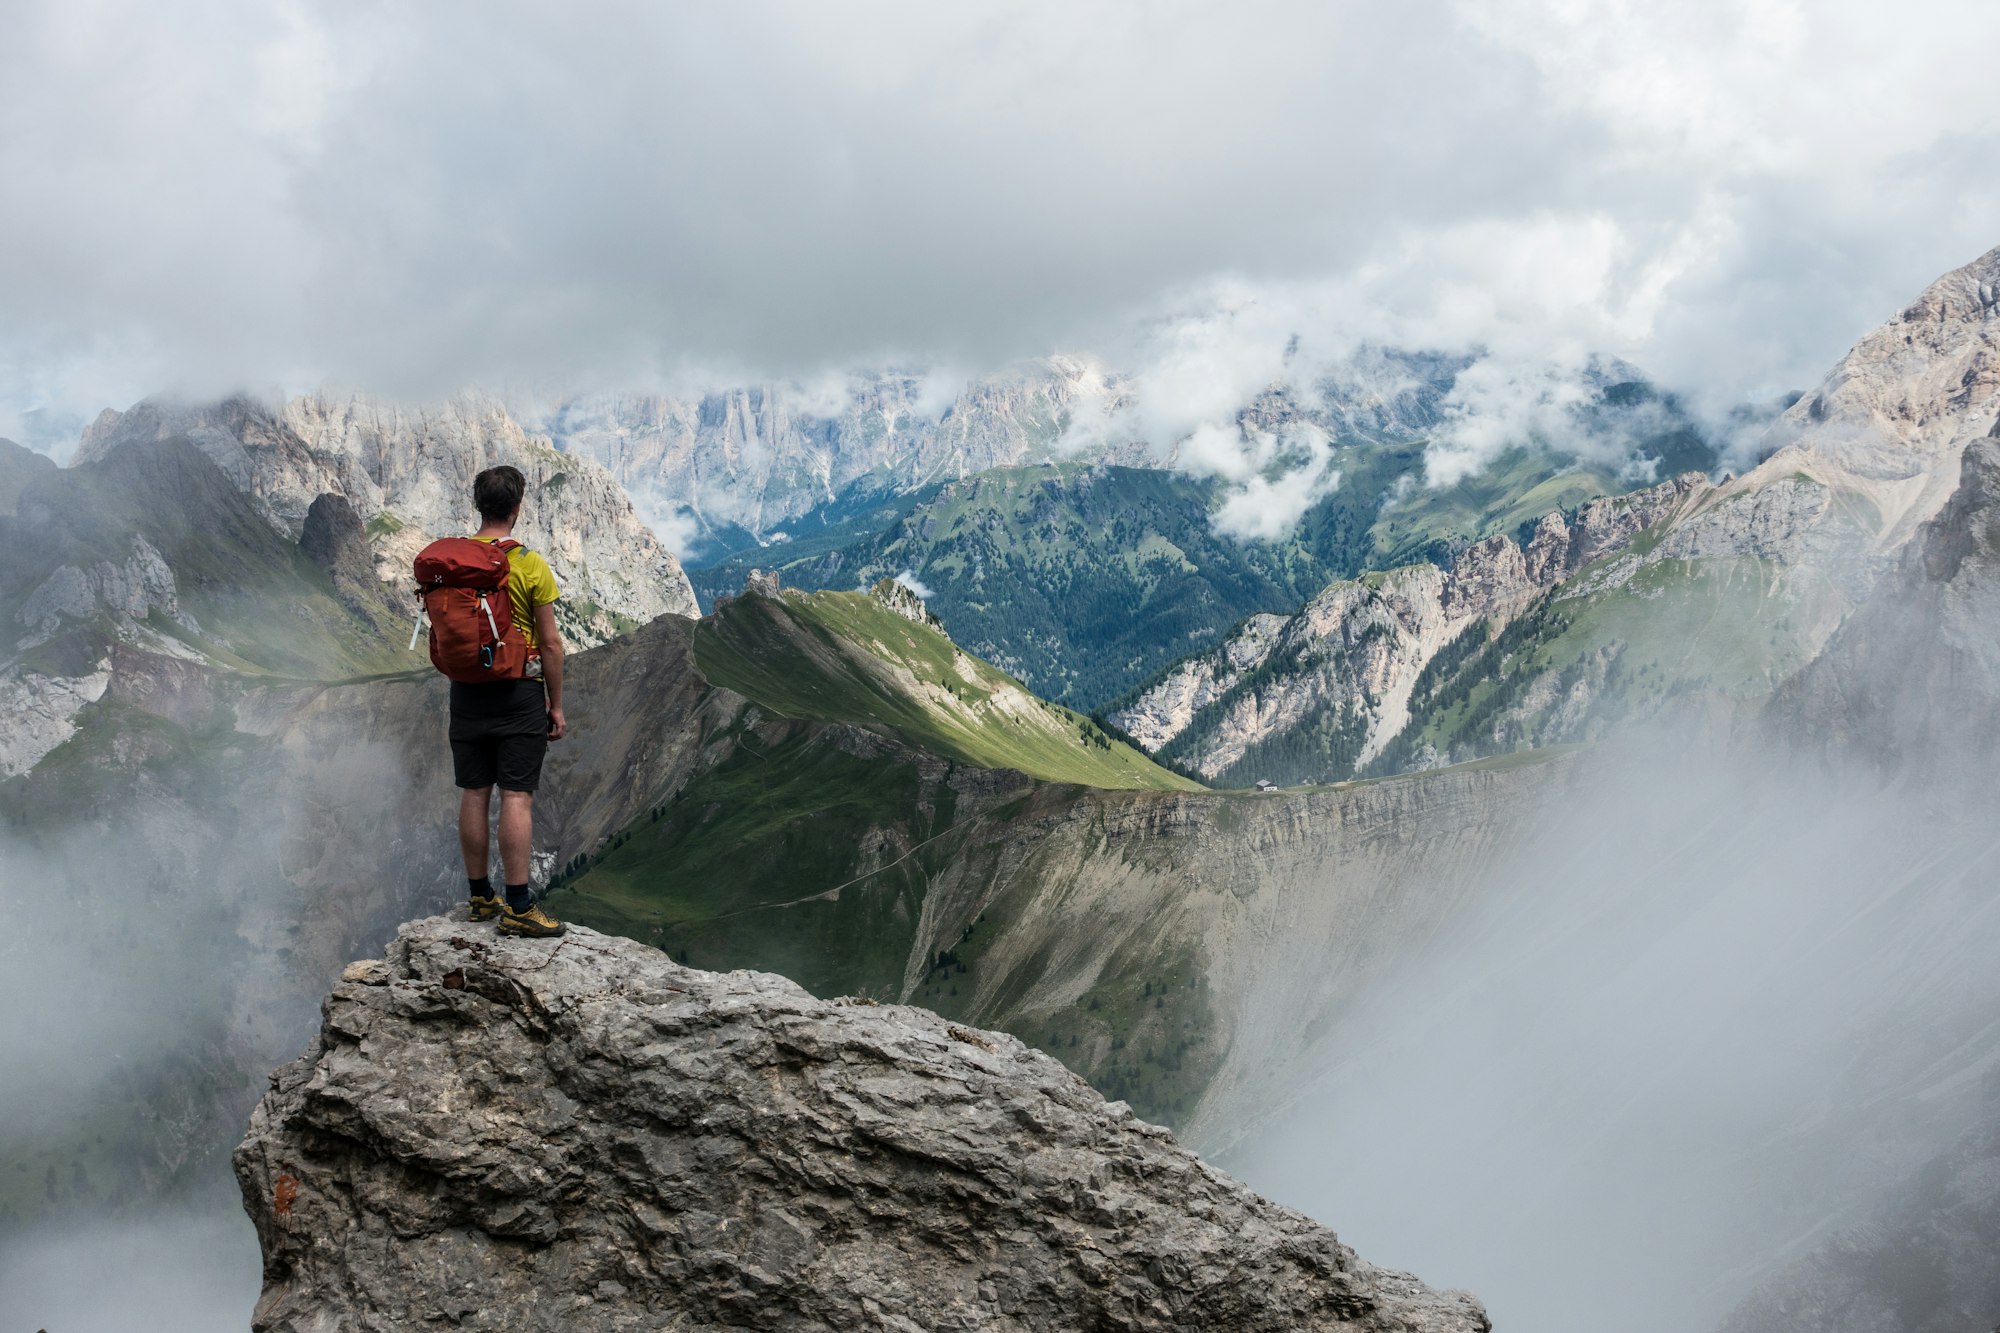 Man standing on rock looking at beautiful mountains - Photo by Lucas Clara on Unsplash